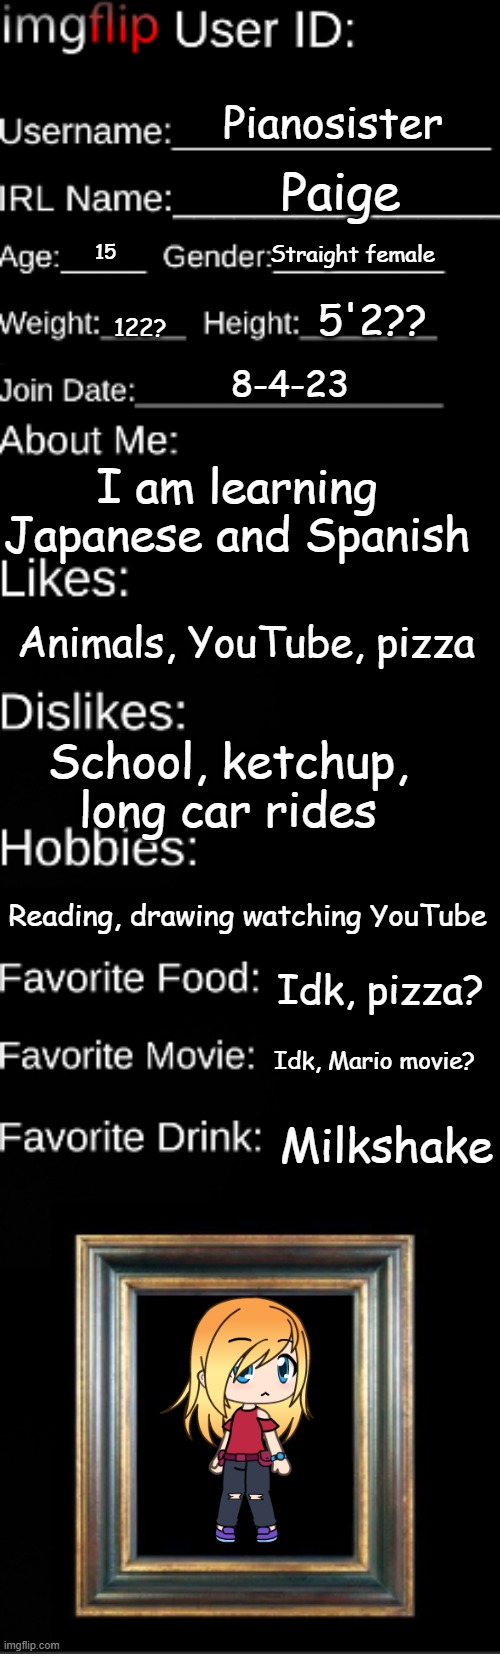 I did this because why not | Pianosister; Paige; Straight female; 15; 5'2?? 122? 8-4-23; I am learning Japanese and Spanish; Animals, YouTube, pizza; School, ketchup, long car rides; Reading, drawing watching YouTube; Idk, pizza? Idk, Mario movie? Milkshake | image tagged in imgflip user id | made w/ Imgflip meme maker